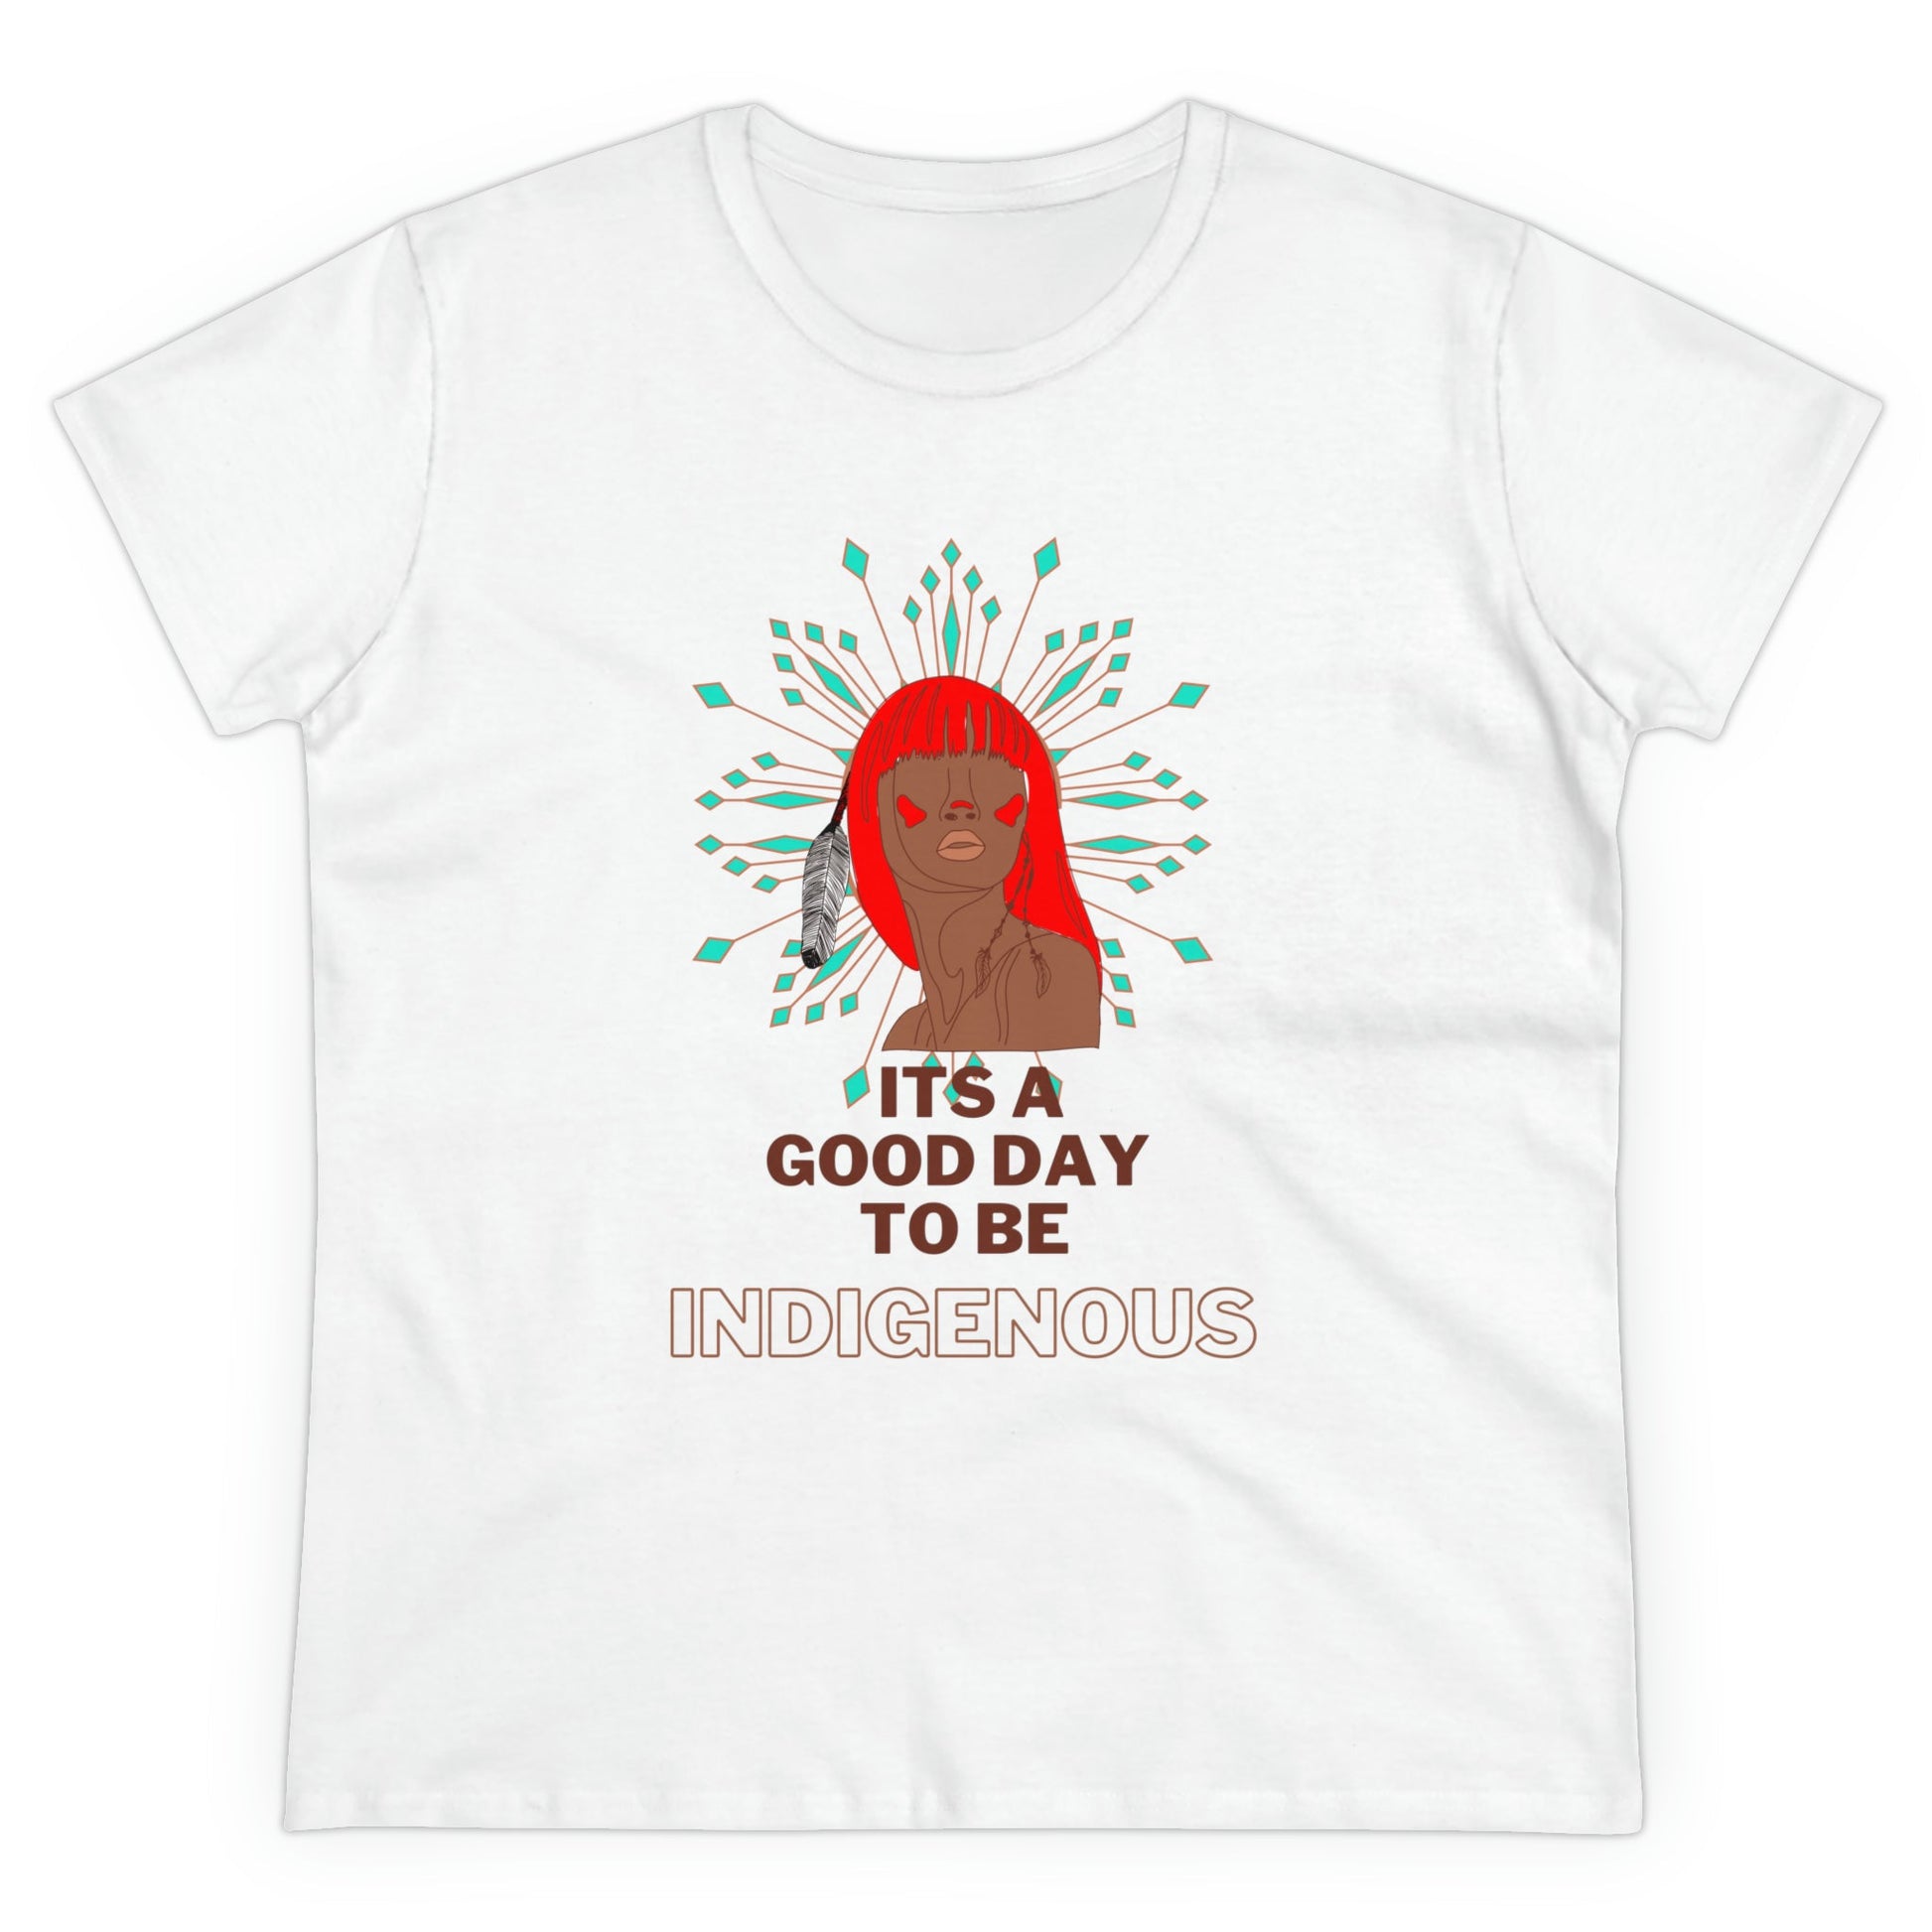 Its a good day to be Indigenous Cotton Tee - Nikikw Designs